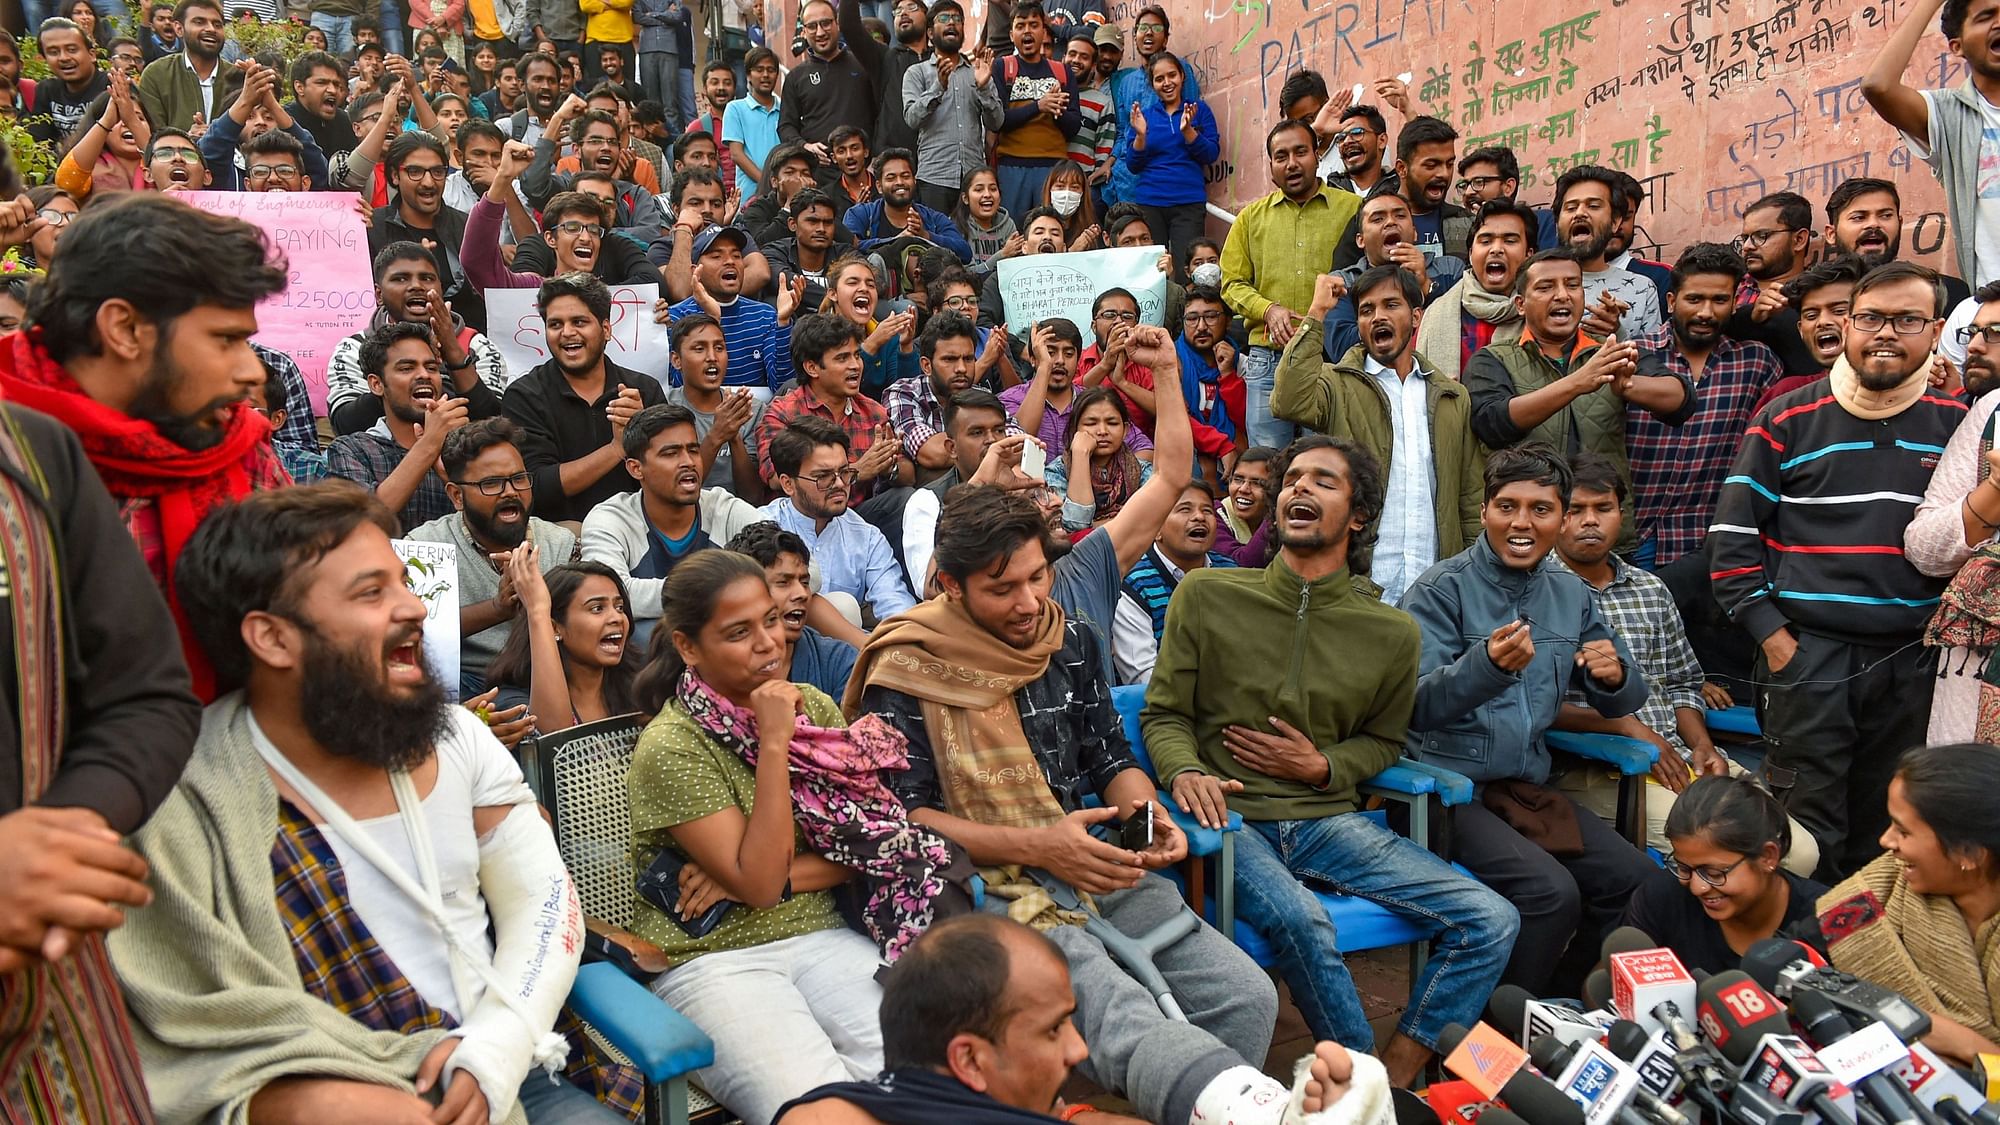 JNU students continue to demand fee hike rollback and slam biased media after the protest march on Monday.